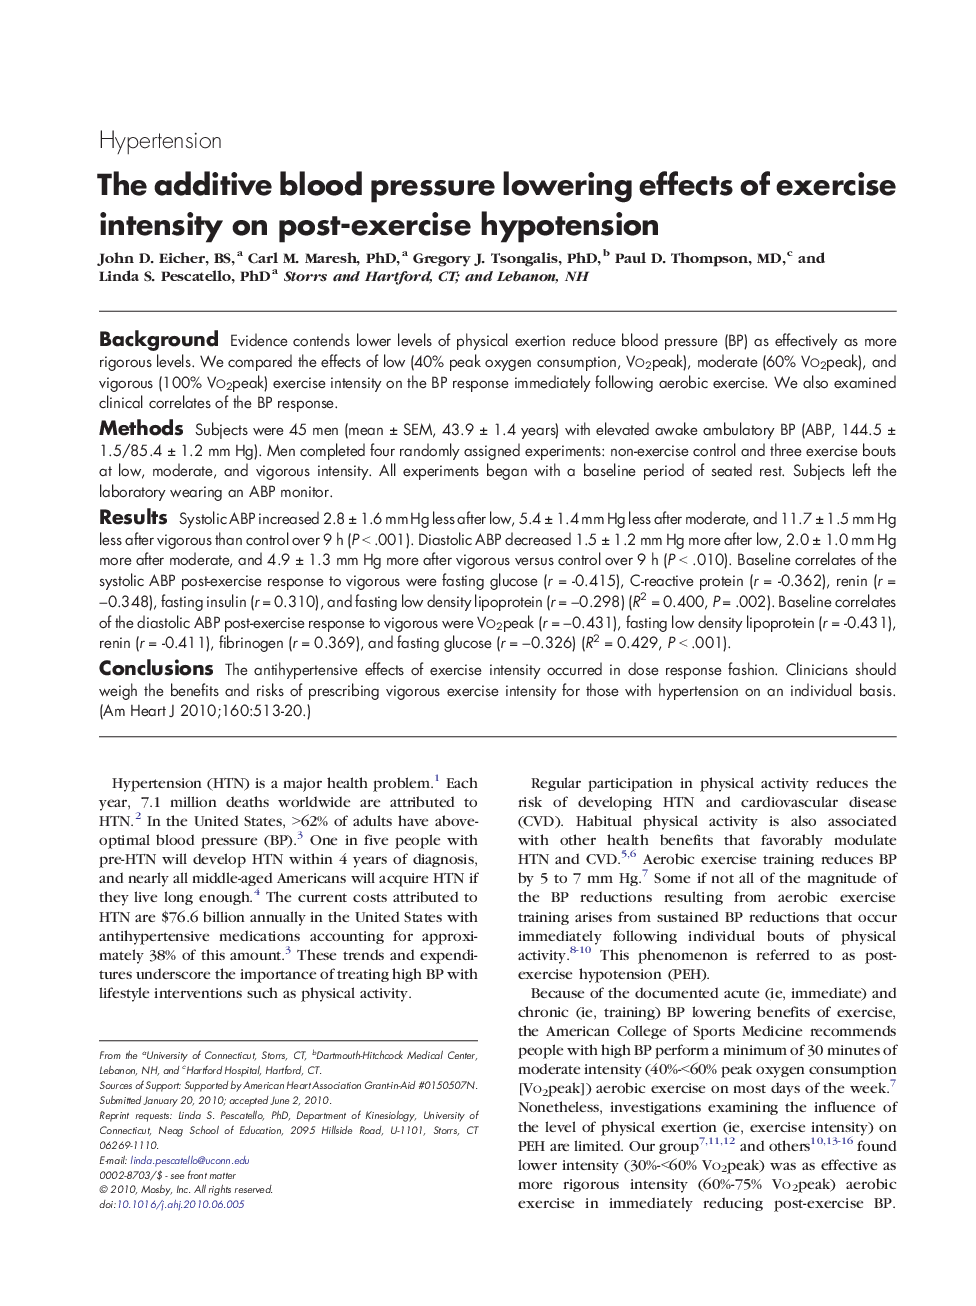 The additive blood pressure lowering effects of exercise intensity on post-exercise hypotension 